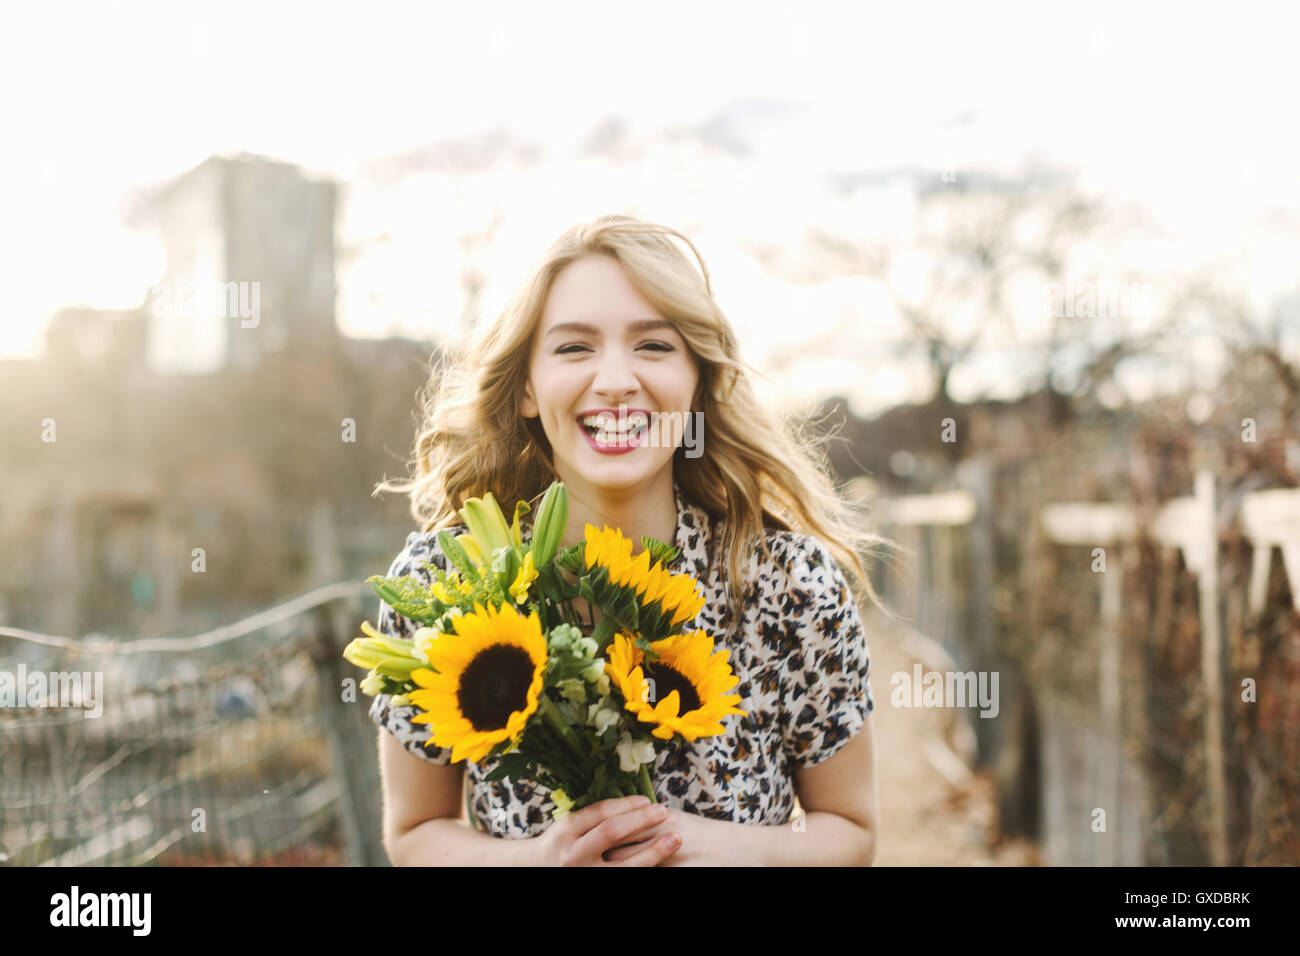 Portrait of young woman holding sunflowers, smiling Banque D'Images